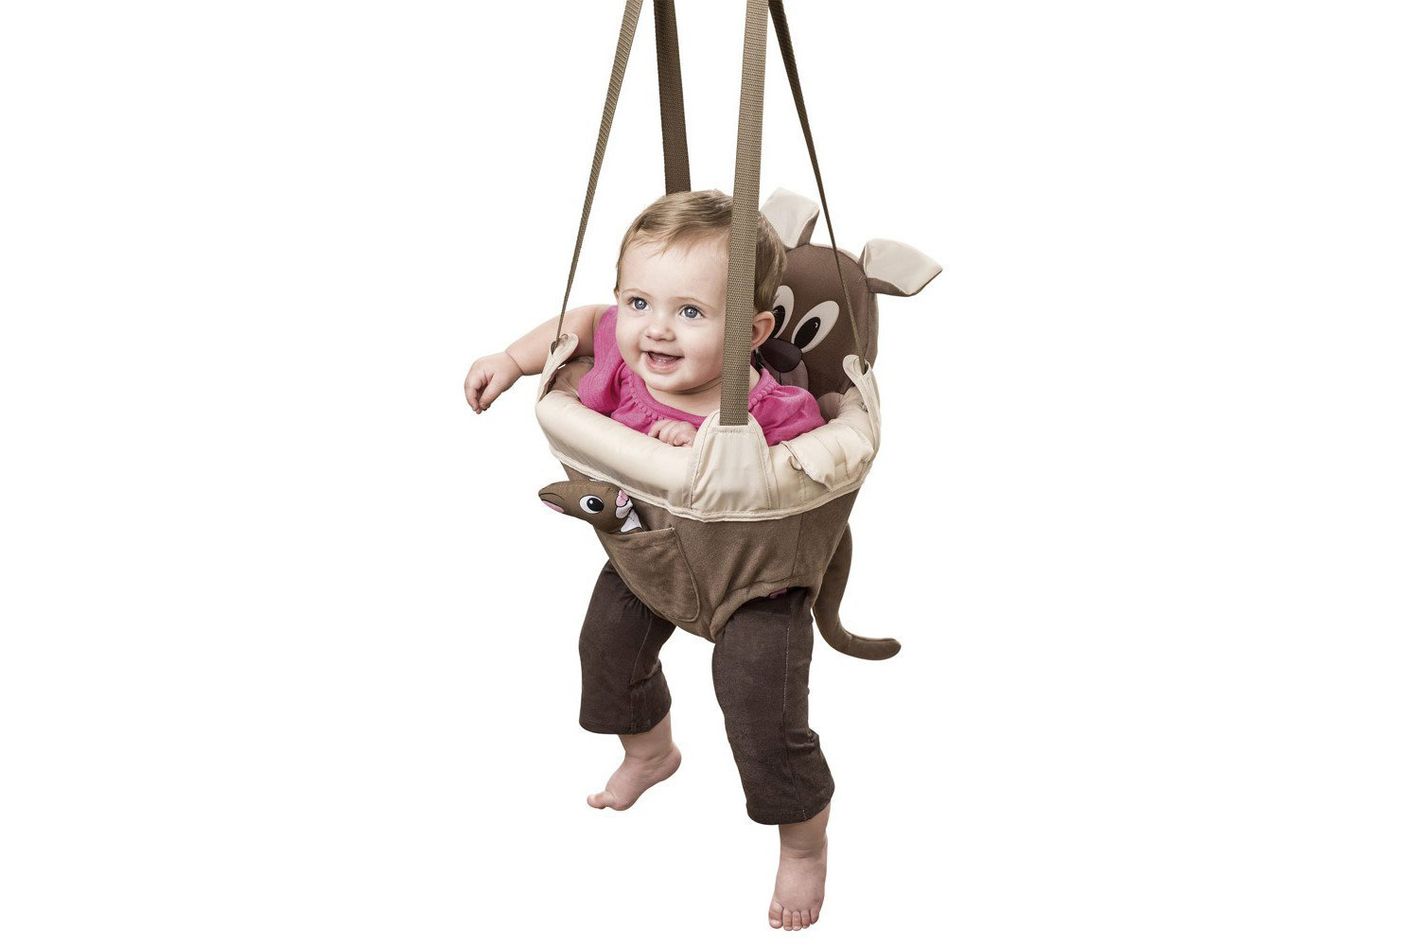 The Best Baby Bouncers and Jumpers Reviews 2017